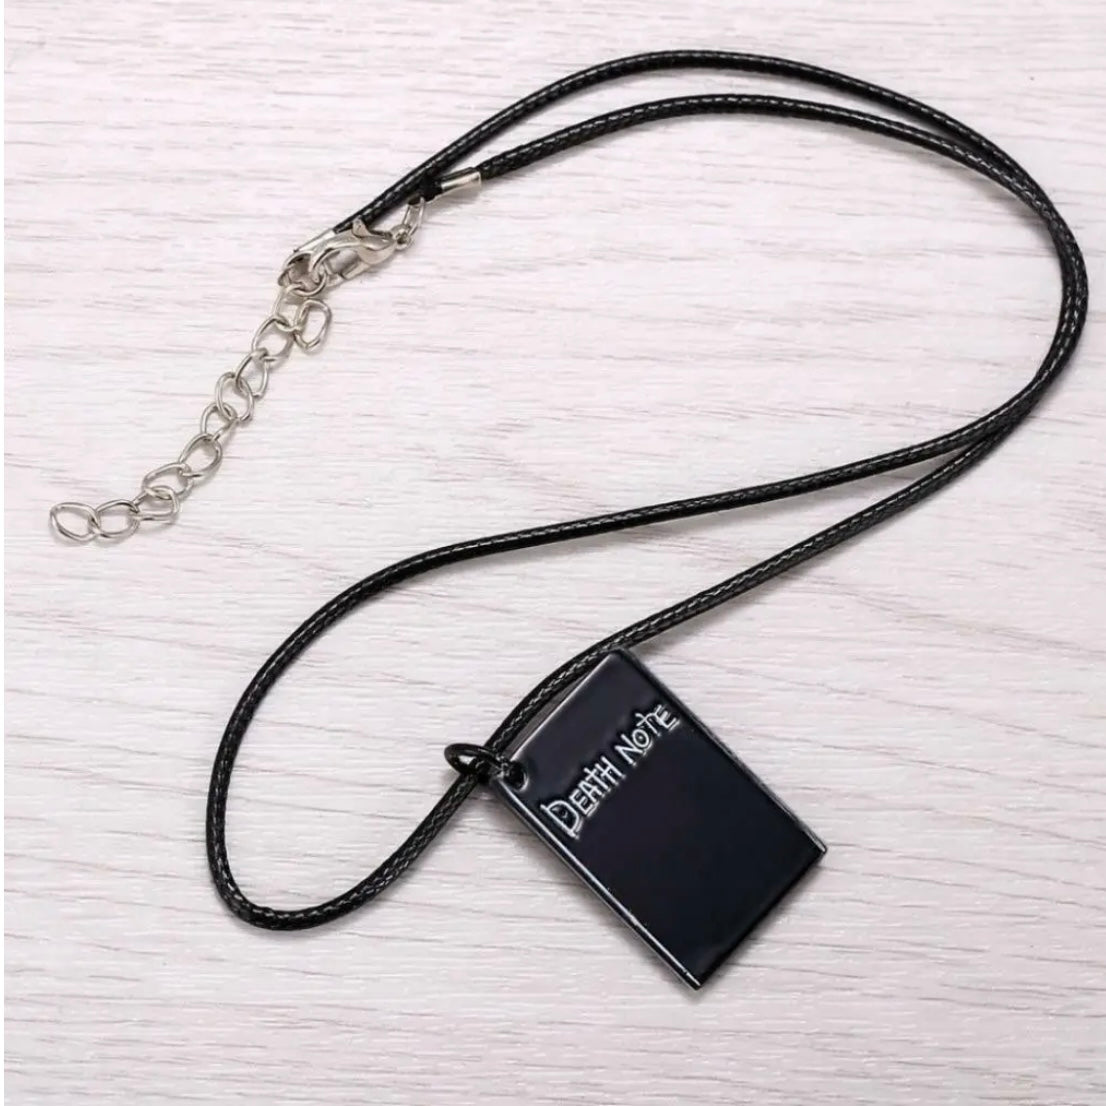 Death Note Notebook Necklace